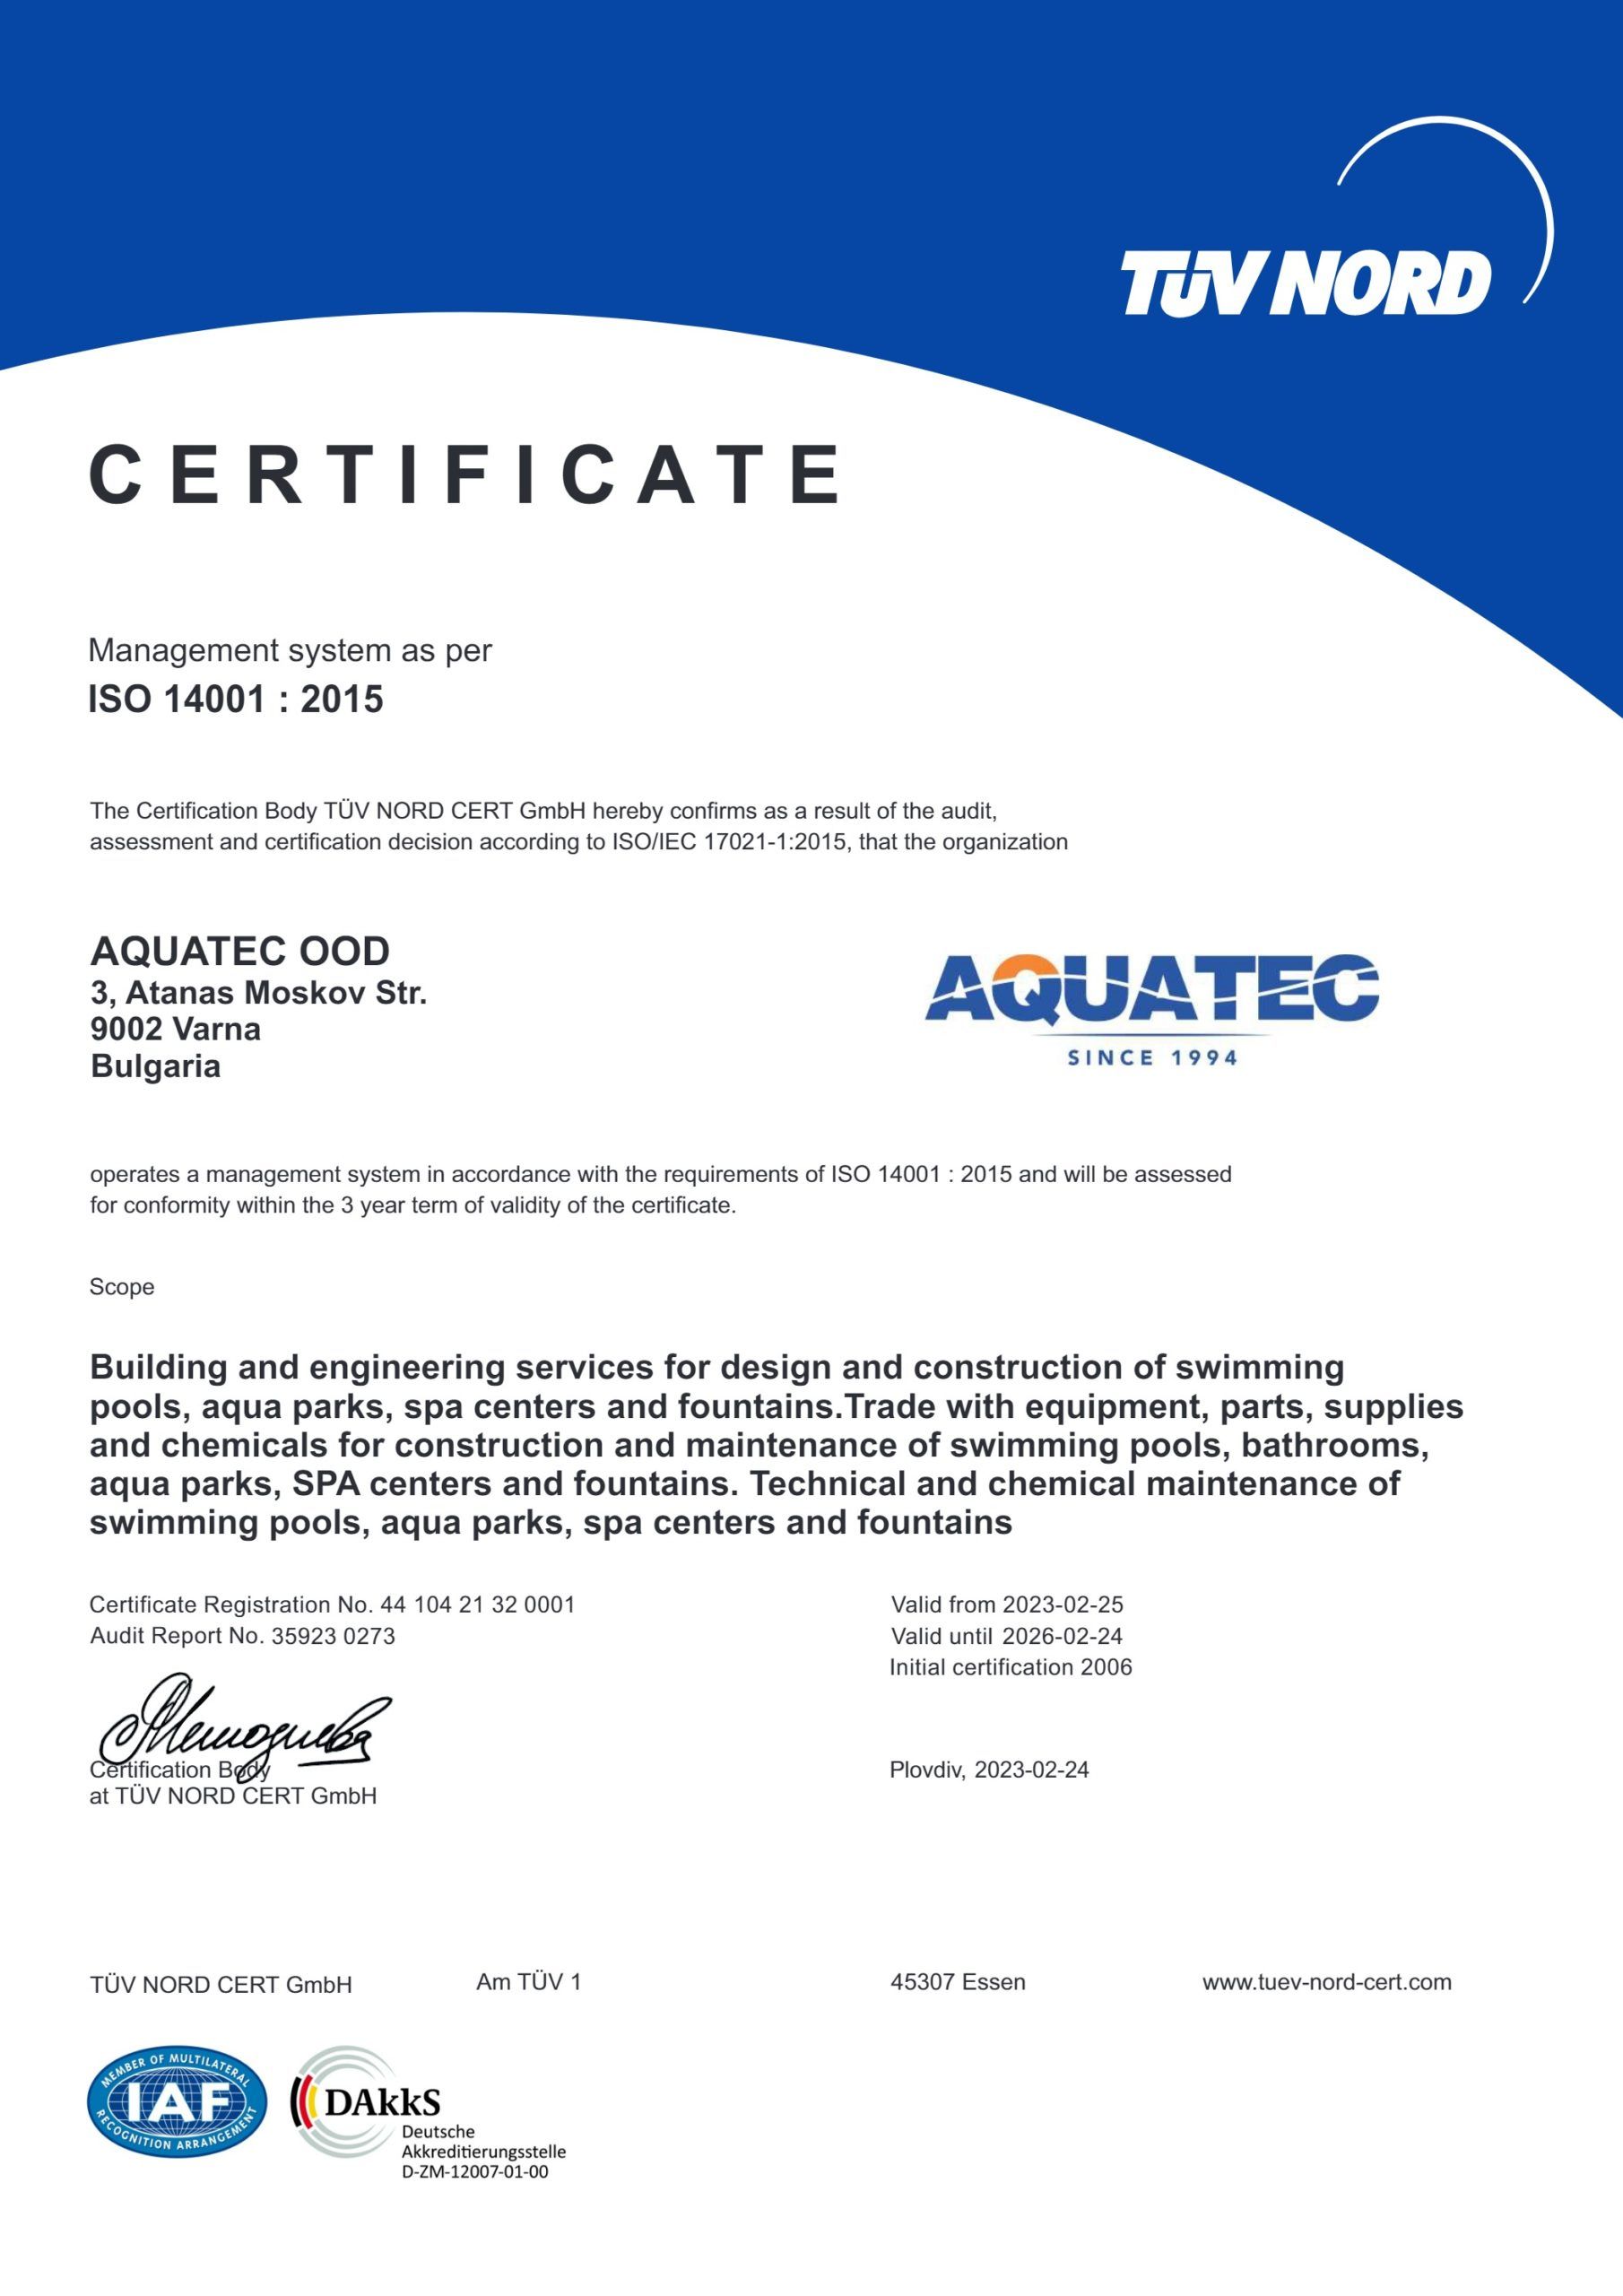 CERTIFICATE ACCORDING TO ISO 14001 : 2015